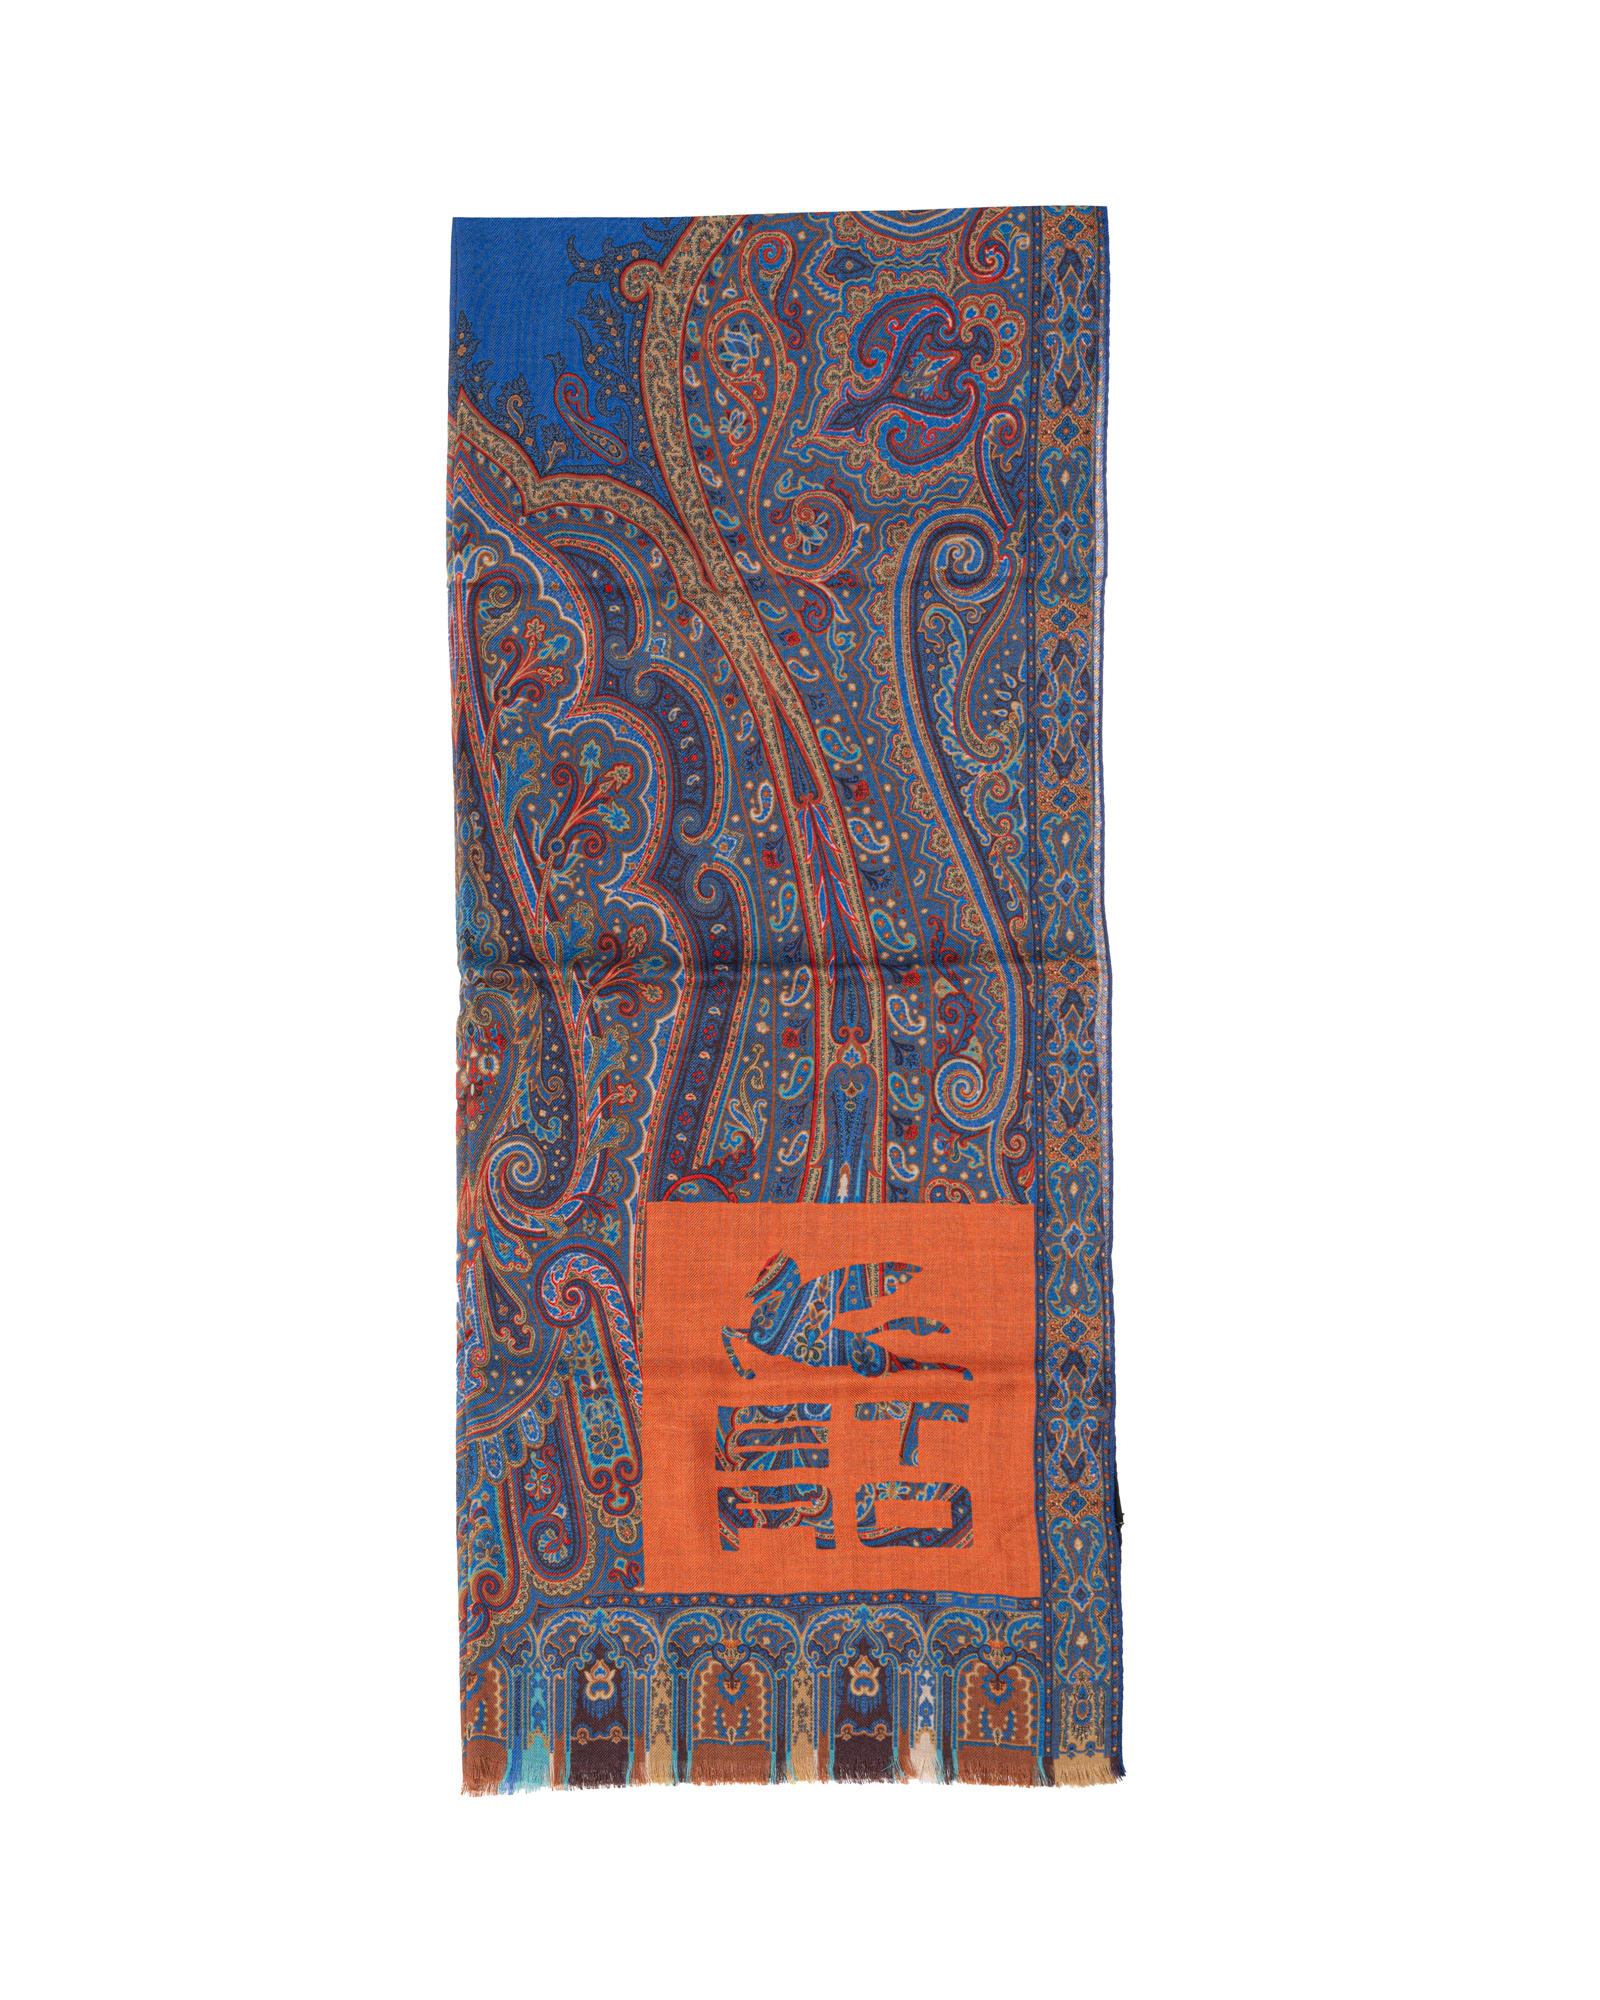 Etro Cashmere and silk scarf embellished